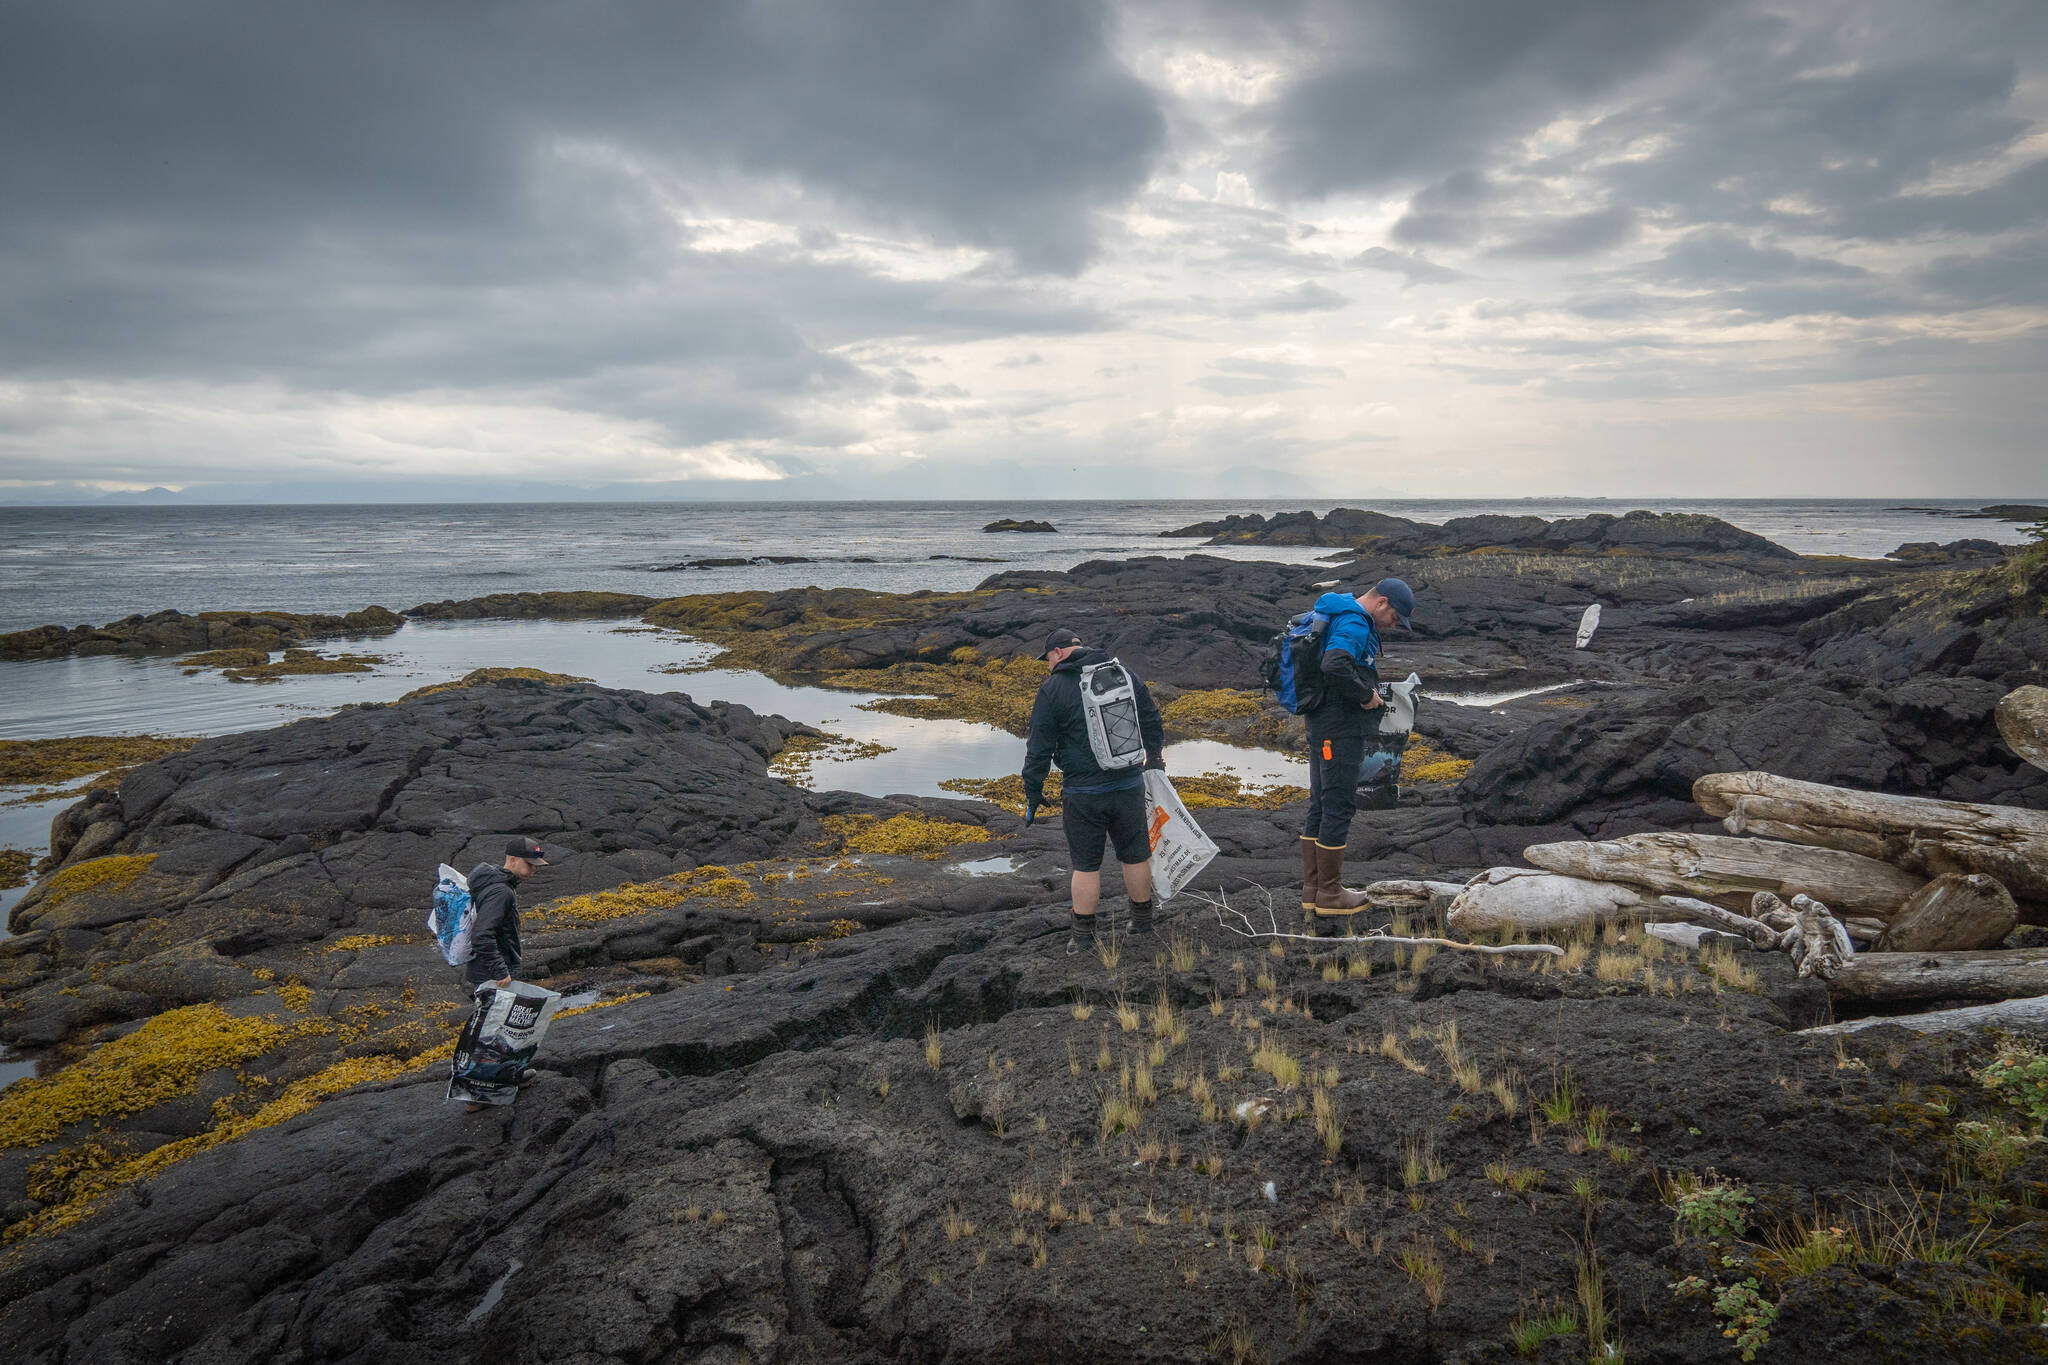 The kickoff of the 38th Annual International Coastal Cleanup began on the volcanic beaches at the base of L’ux, a stratovolcano also known as Mt. Edgecumbe on Kruzof Island, 14 miles from Sitka in August. (Ryan Morse / Sitka Conservation Society)